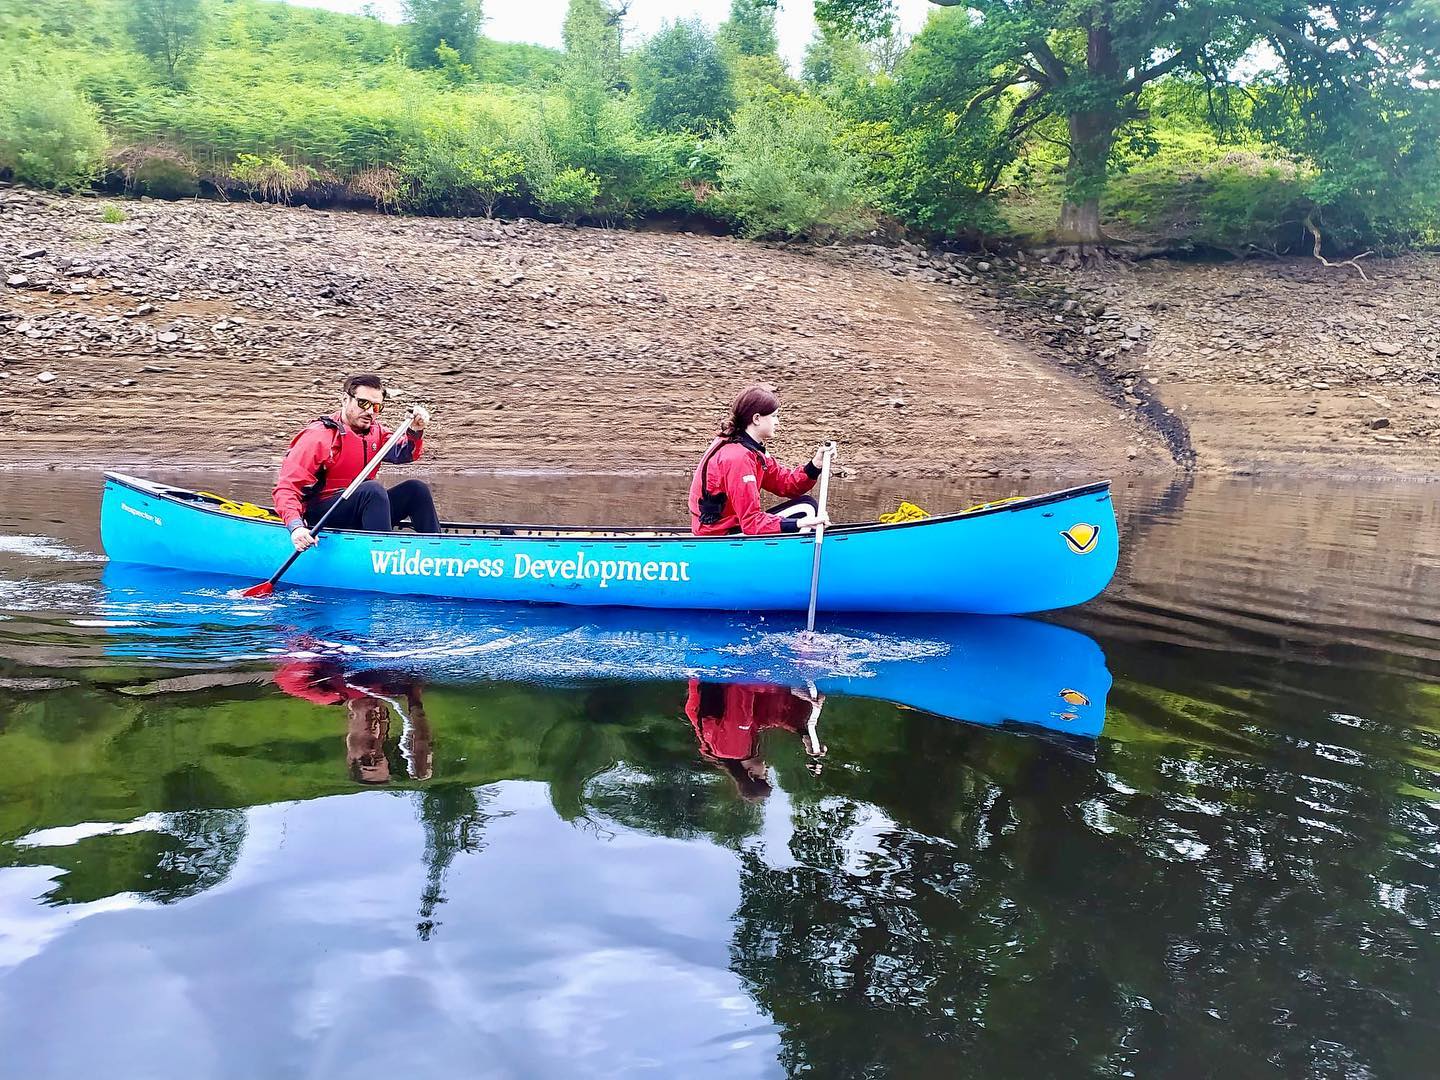 Come and try canoing in the Goyt Valley with Wilderness Development. Our next session is on 22 August, or can be arranged on any date to suit groups. 

Suitable for all, with the chance to explore, learn new skills, or get wet! Full info and online booking at https://www.wilderness-development.com/watersports/flatwater-kayaking ⛰🛶⛰
.
.
.
#wildernessdevelopment #smallbusiness #canoeing #kayaking #trysomethingnew #peakdistrict #peakdistrictnationalpark #mountainsfellsandhikes #roamtheuk #outdoorpursuits #outdooradventures #outdooractivities #nationalparksuk #booknow